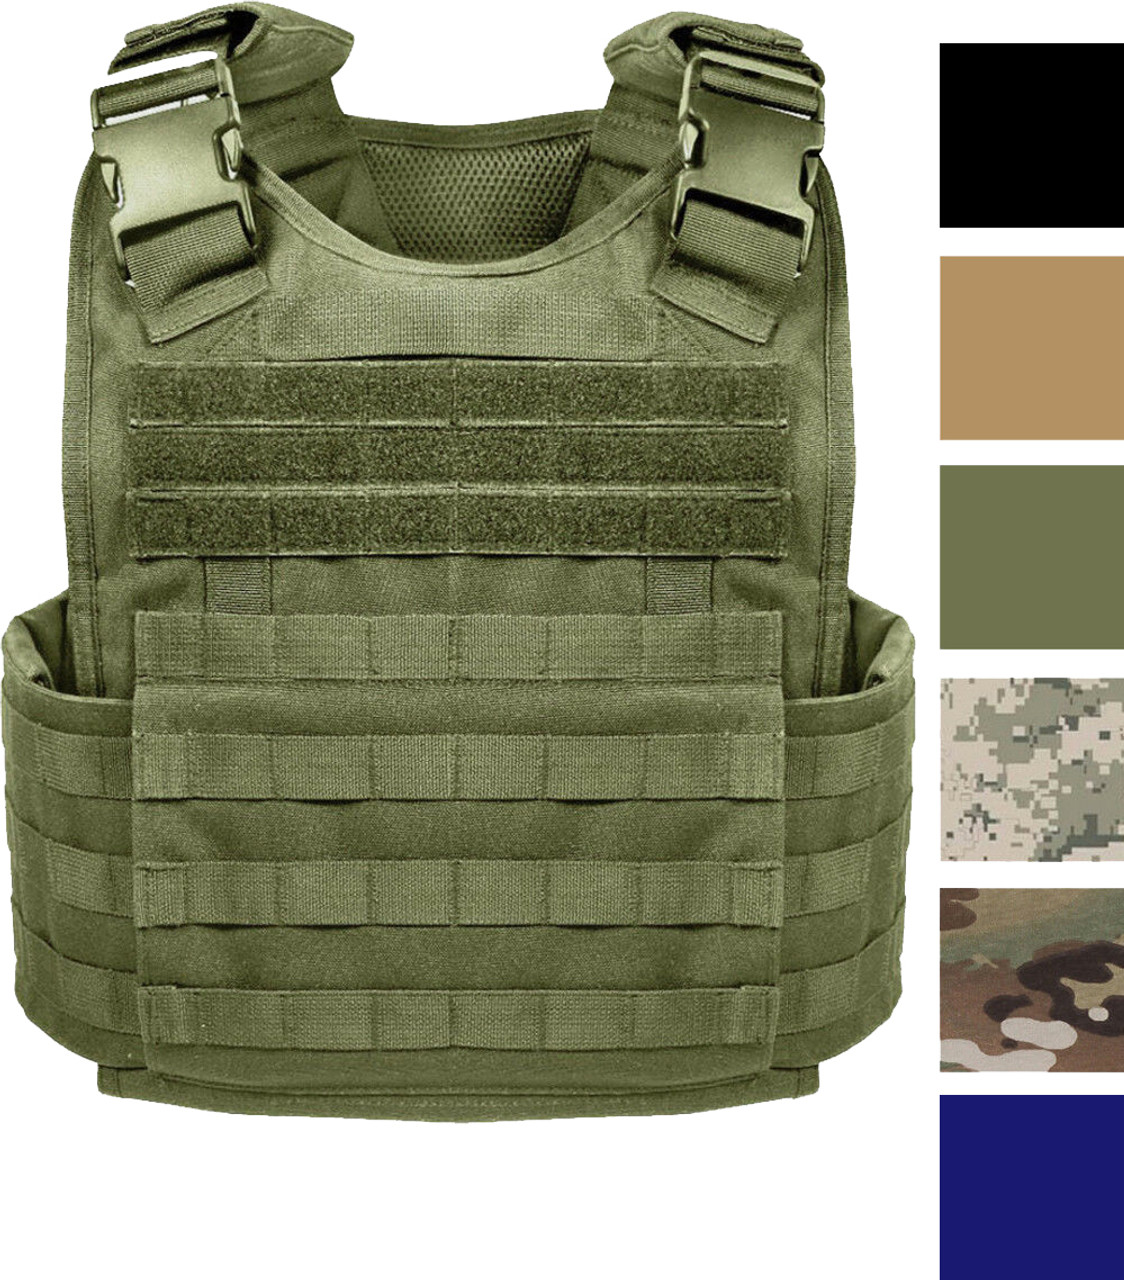 Army green tactical vest plate carrier